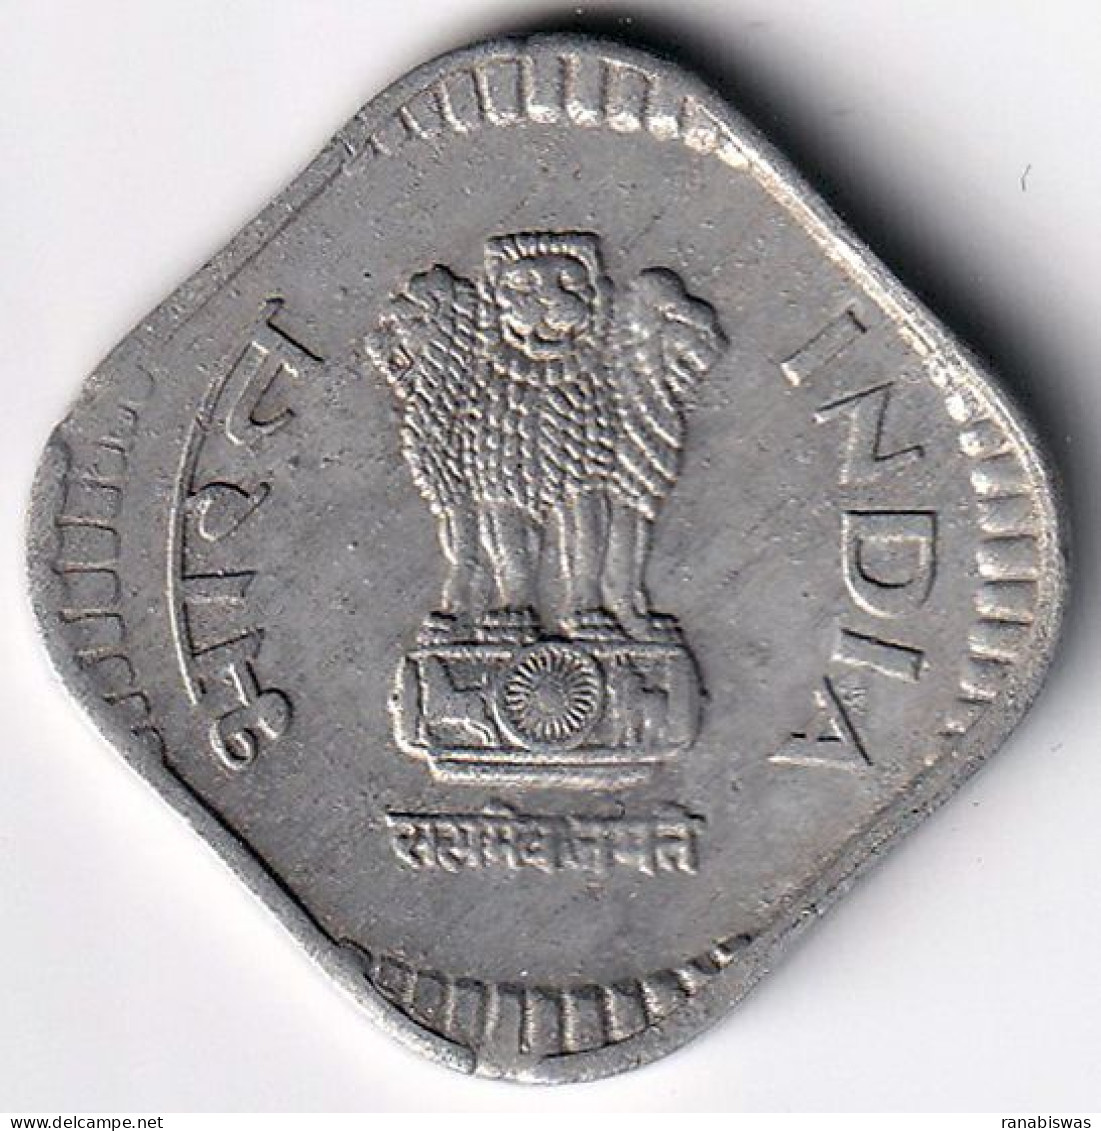 INDIA COIN LOT 363, 5 PAISE 1988, HYDERABAD MINT, AUNC - India